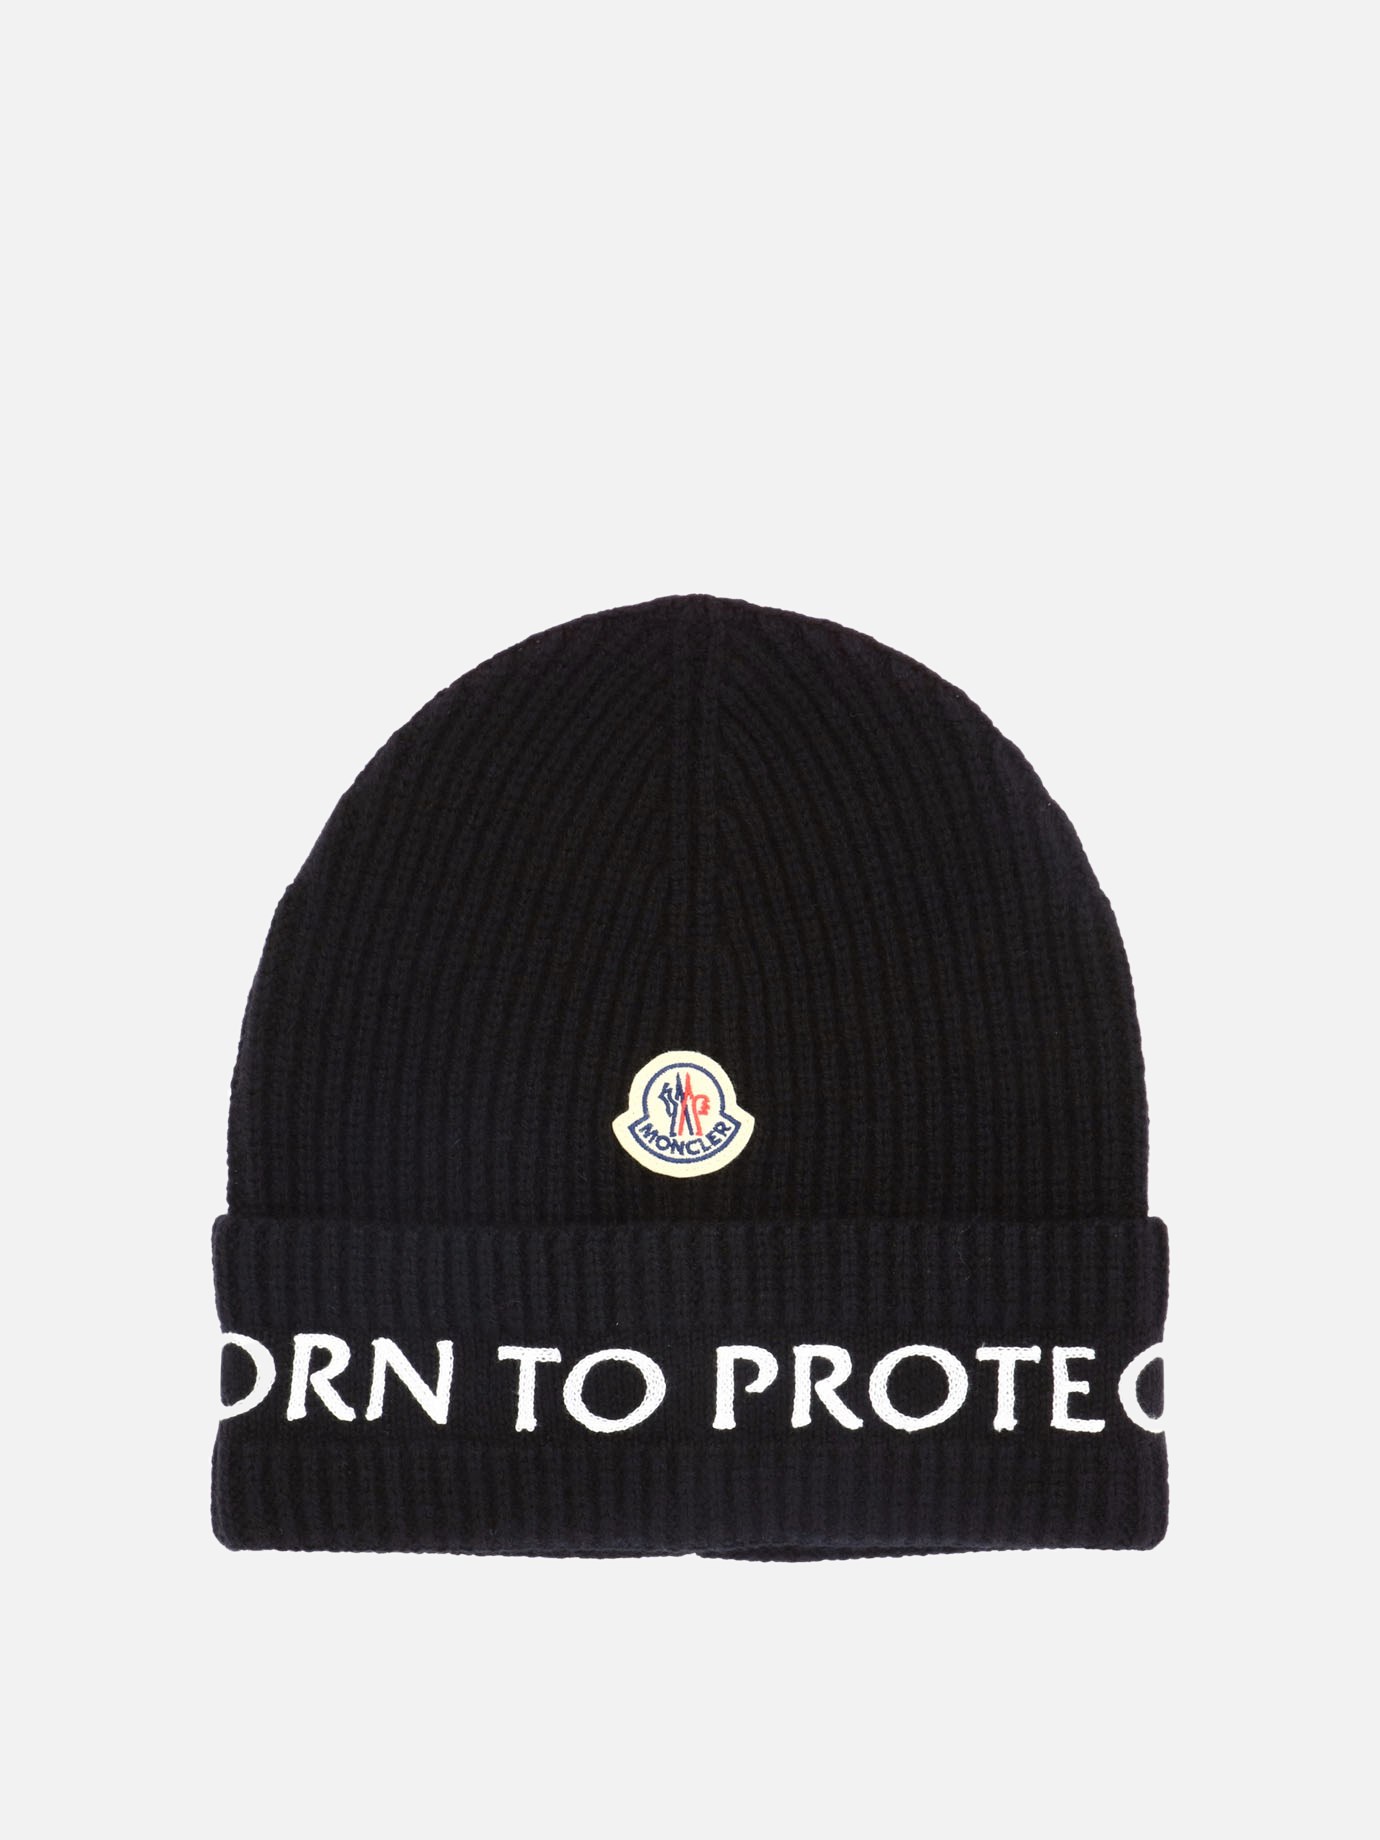 Tricot beanie by Moncler